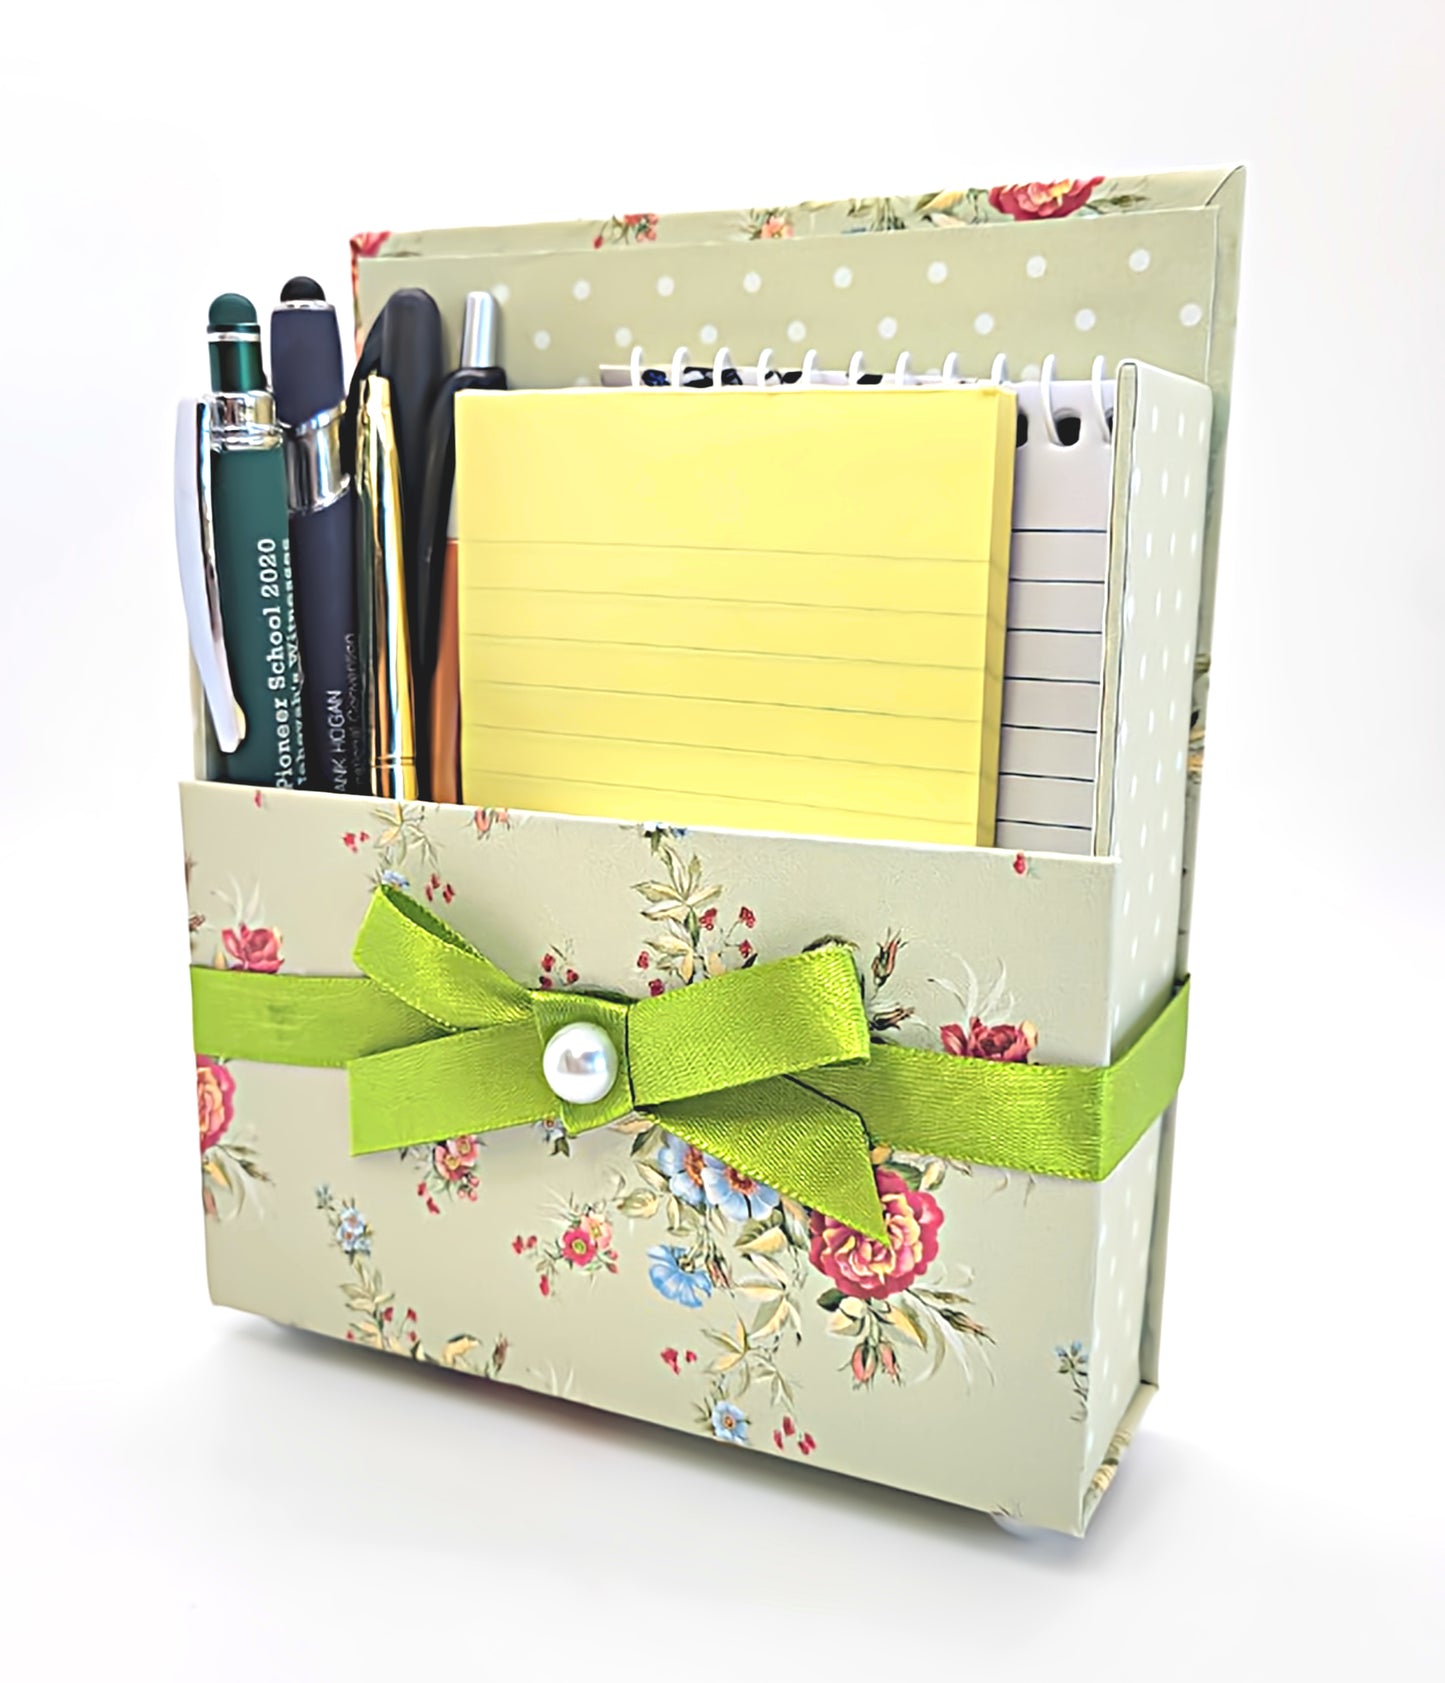 42-Pc Stationery Gift Box Set w/Reusable Desktop Organizer Box and Gold Pen - Coral Pink & Sage Green Floral - Chic Brico